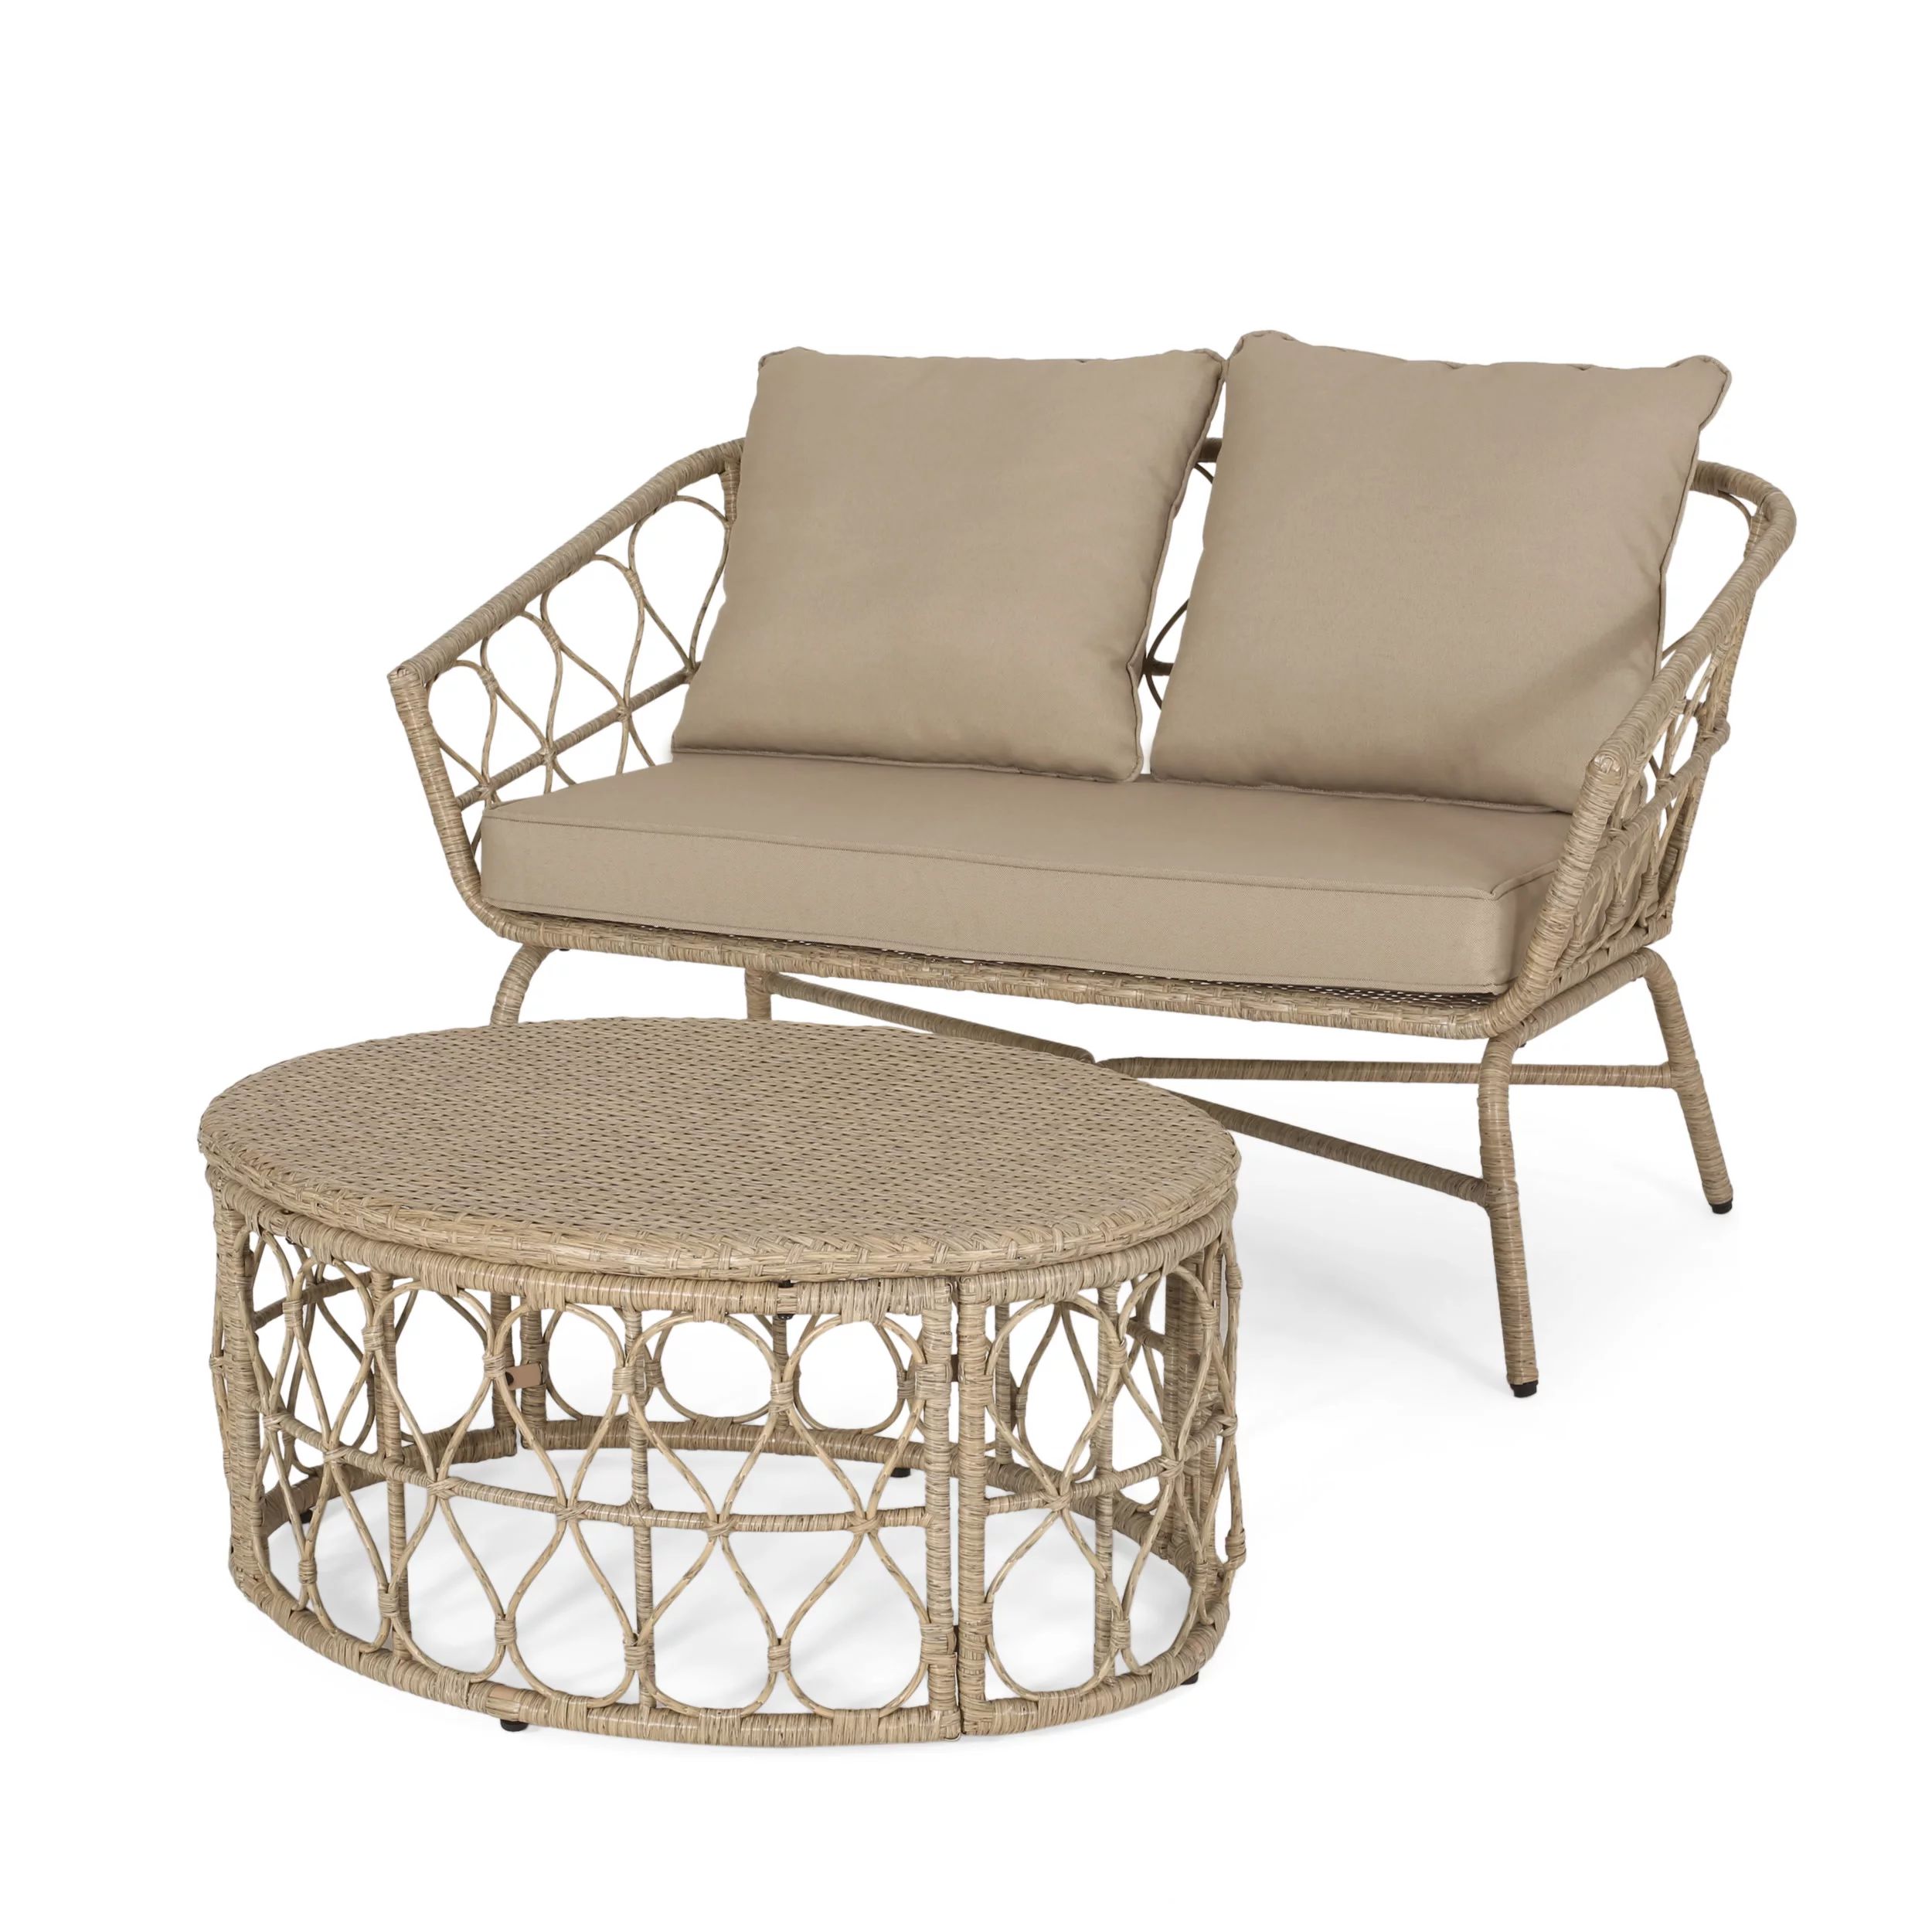 Colmar Outdoor Wicker Loveseat and Coffee Table Set, Light Brown and Beige | Walmart (US)